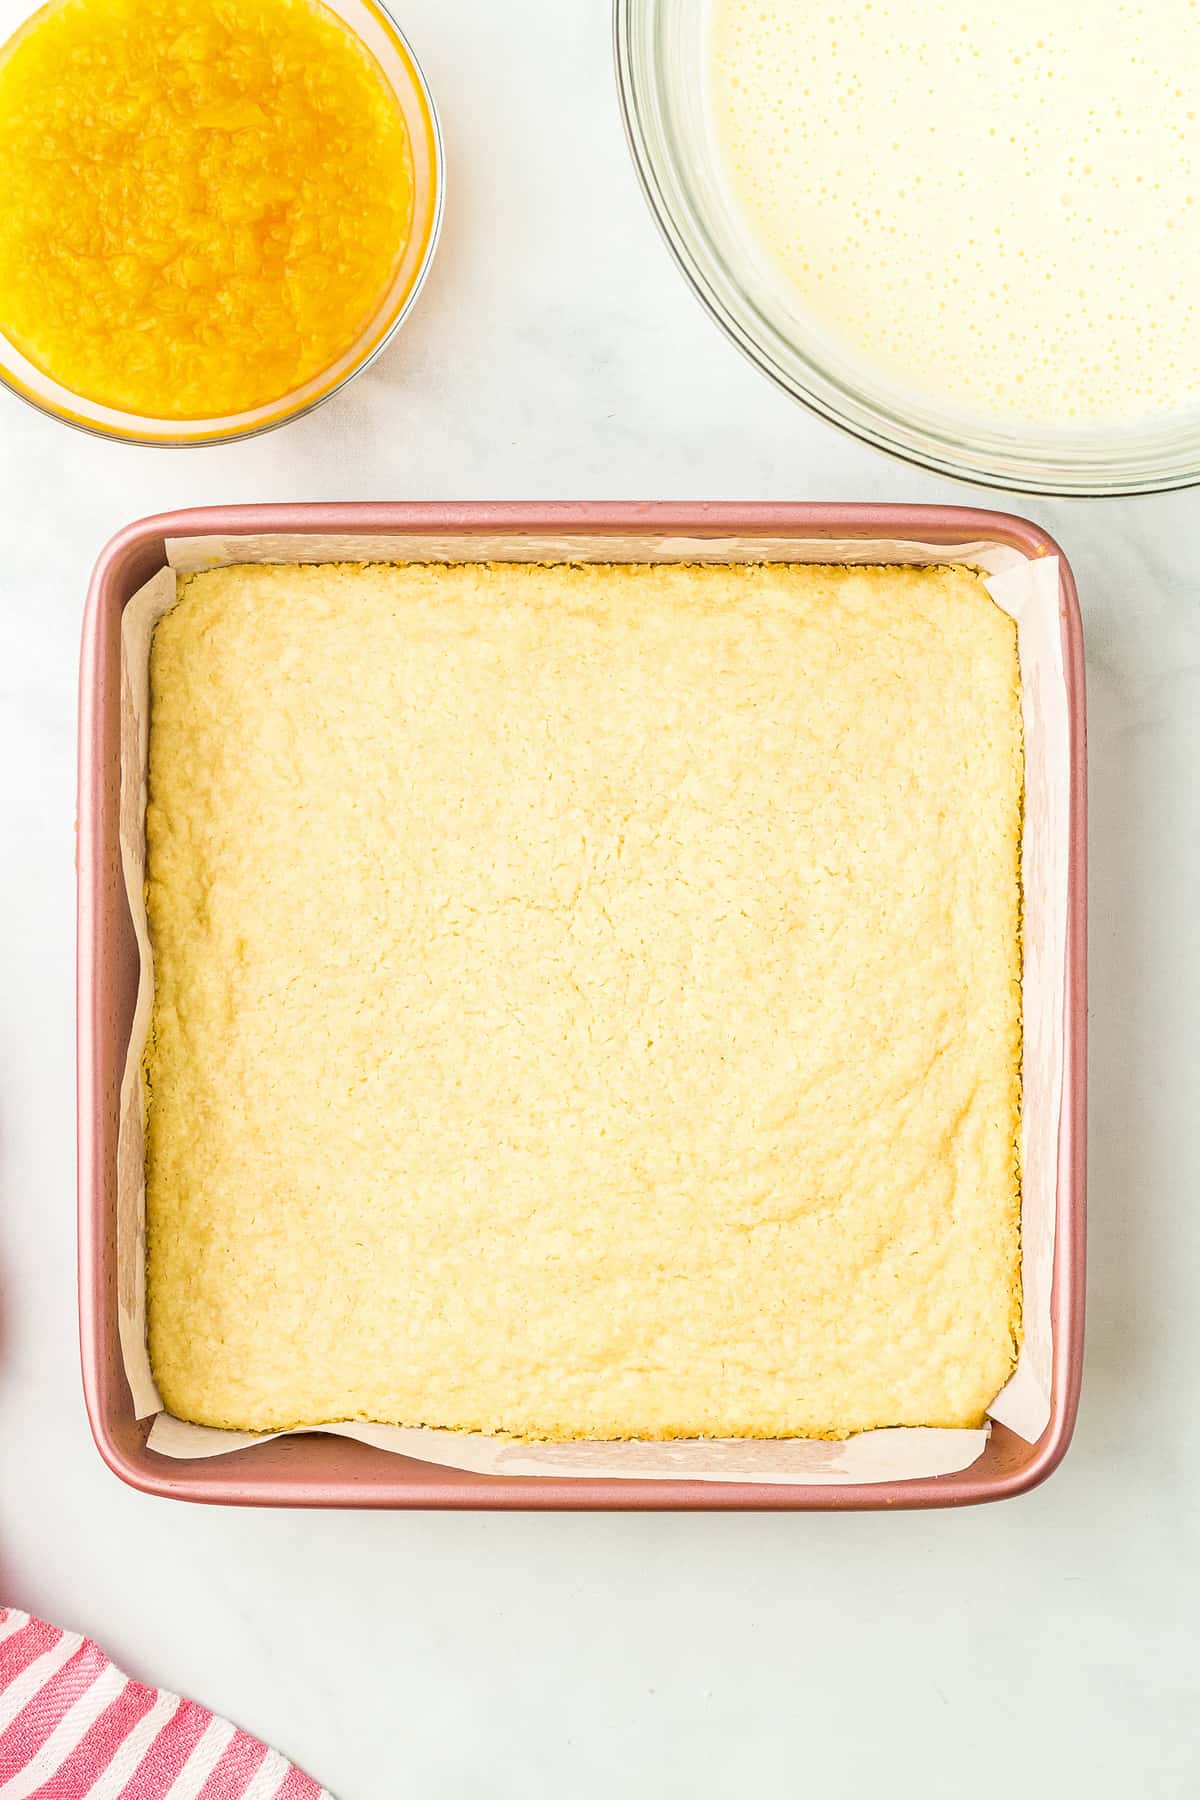 Baked shortbread crust in square pan